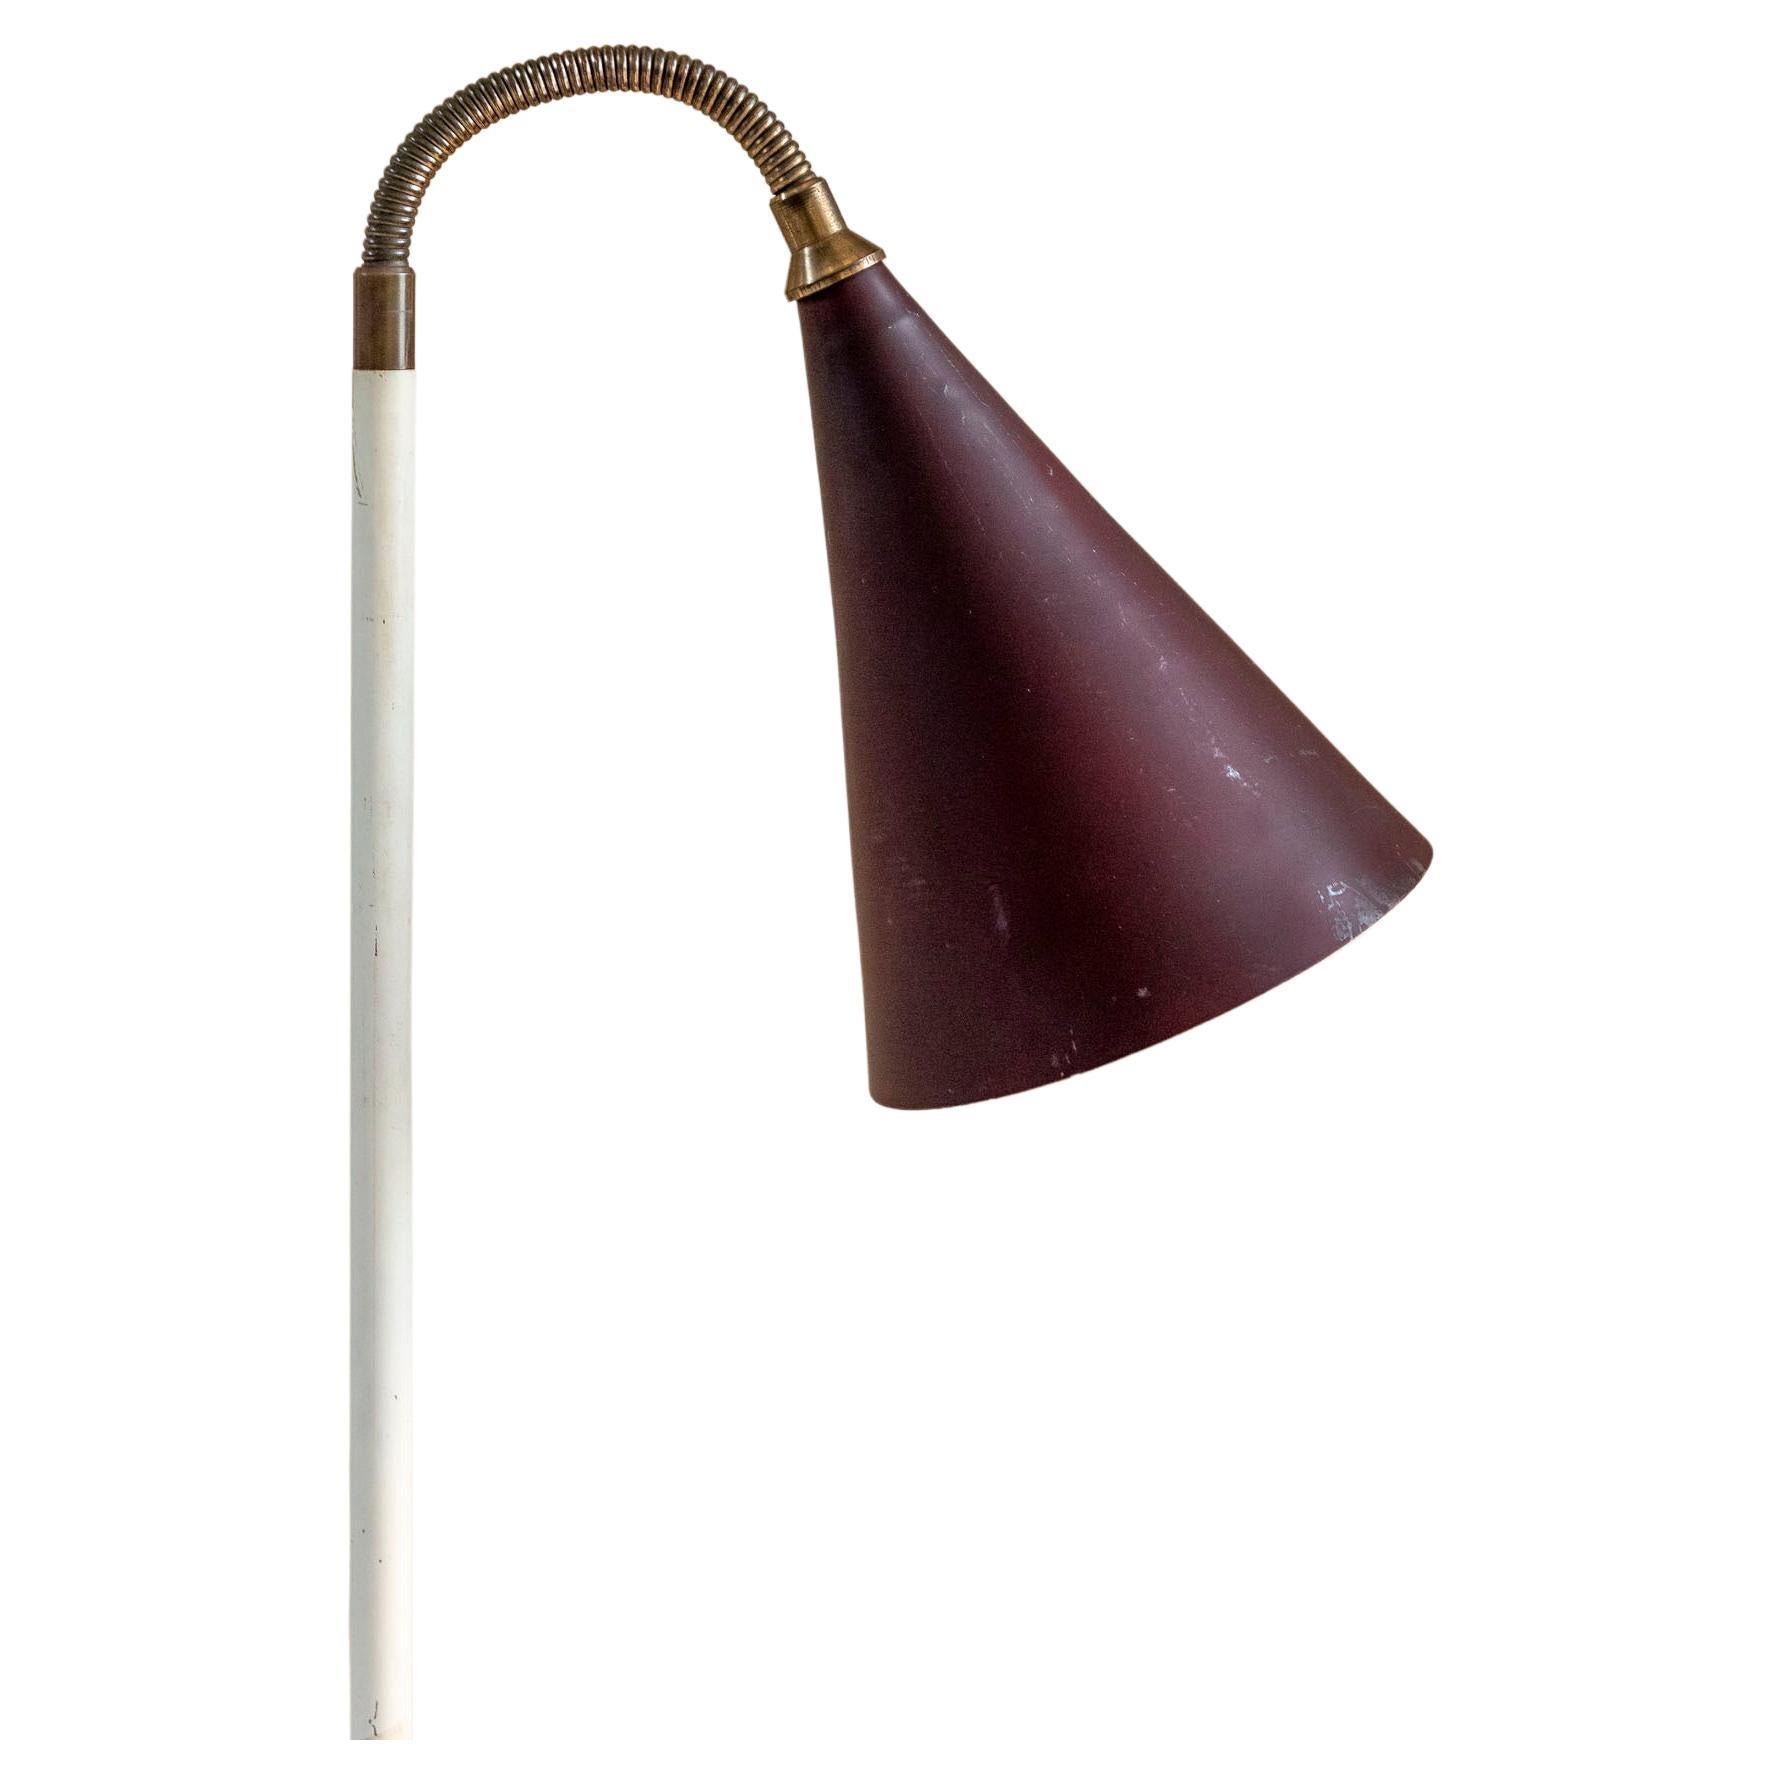 Stunning Mid-century floor lamp attributed to Giuseppe Ostuni.
The lamp consists of a marble base that support a white enamelled metal rod with brass details. 
The original lampshade is also made in lacquered purple metal and is adjustable in